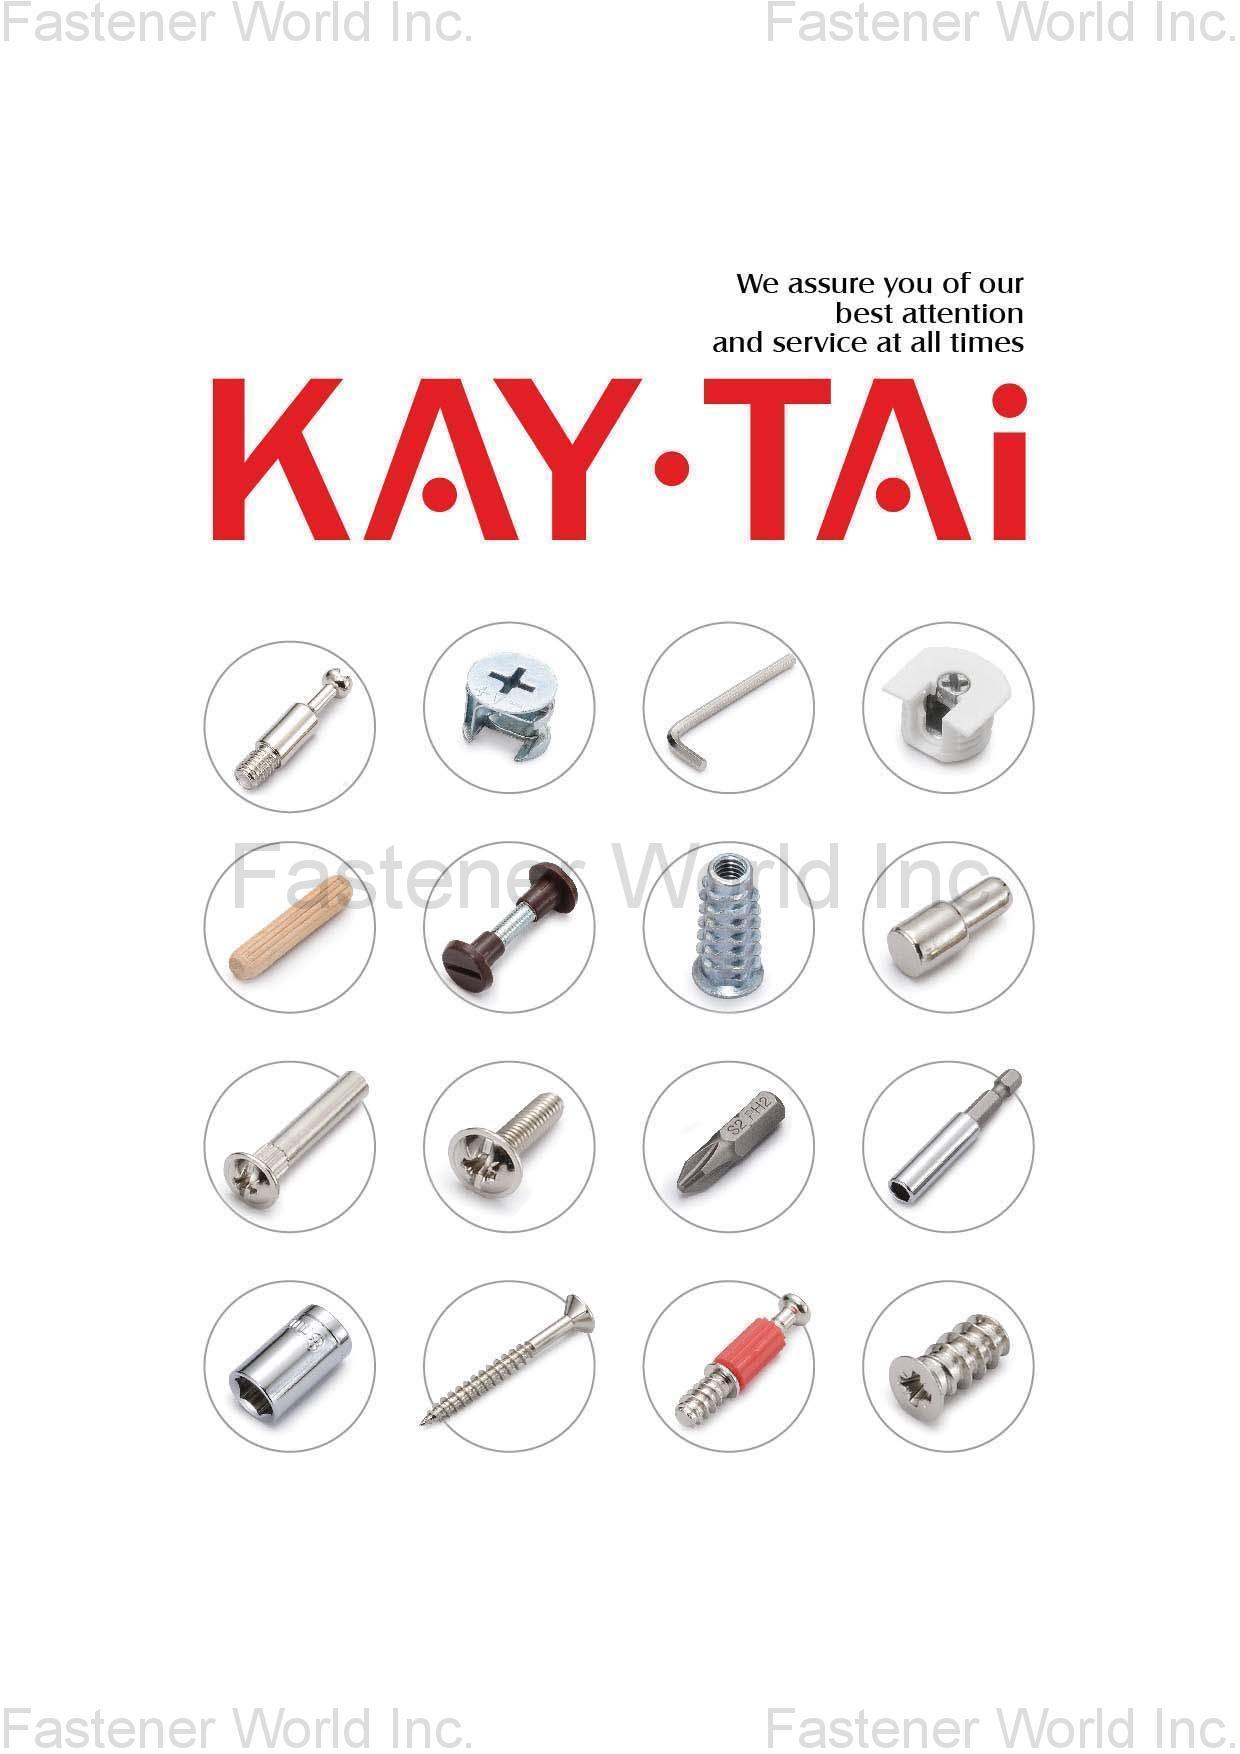 KAY-TAI FASTENERS INDUSTRIAL CO., LTD  , KD FITTINGS,Dowels,Zinc Alloy Cams,Quick Assembly Dowels,Eccentric  ASSEMBLY TOOLS & PARTS,Wrench,Allen Keys,Wooden Dowelsm,Plastic Cover Caps  Nuts,D Nuts,E Nuts,Insert Nuts,Sleeve Nuts,Connecting Nuts,Rivets,Cross Dowels,Nylon Nuts. SHELF SUPPORTS,Steel Pins,Glass Shelf Supports,Steel Shelf Supports,Supporting Pins  SCREWS,Chipboard Screws,HI-LO Screws,Coating Screws,EURO Screws,Furniture Screws,Countersunk Screws,Pan Head Screws,JCBB / JCBC / JCBD Screws,Machine Screws,Knob Screws,Connecting Screws,5/32